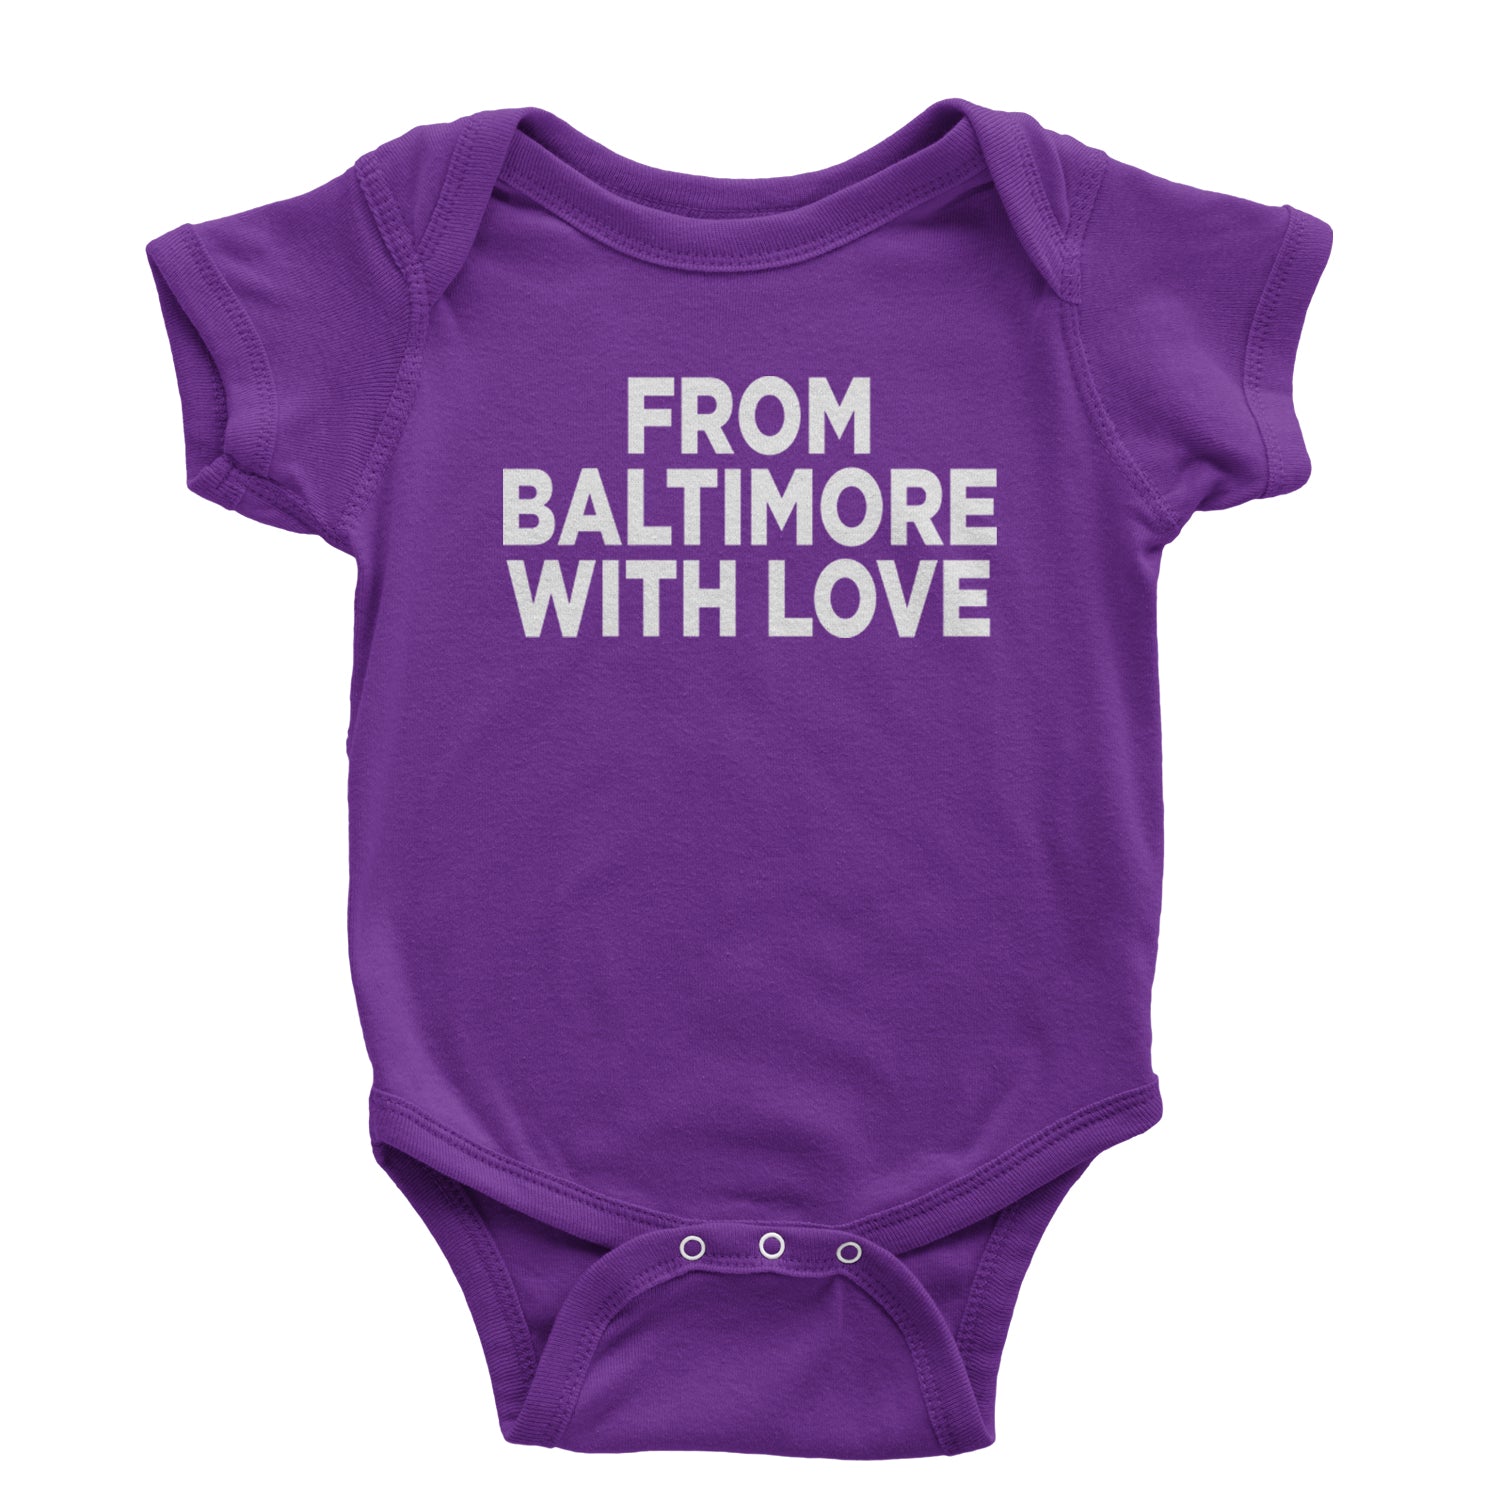 From Baltimore With Love Infant One-Piece Romper Bodysuit and Toddler T-shirt